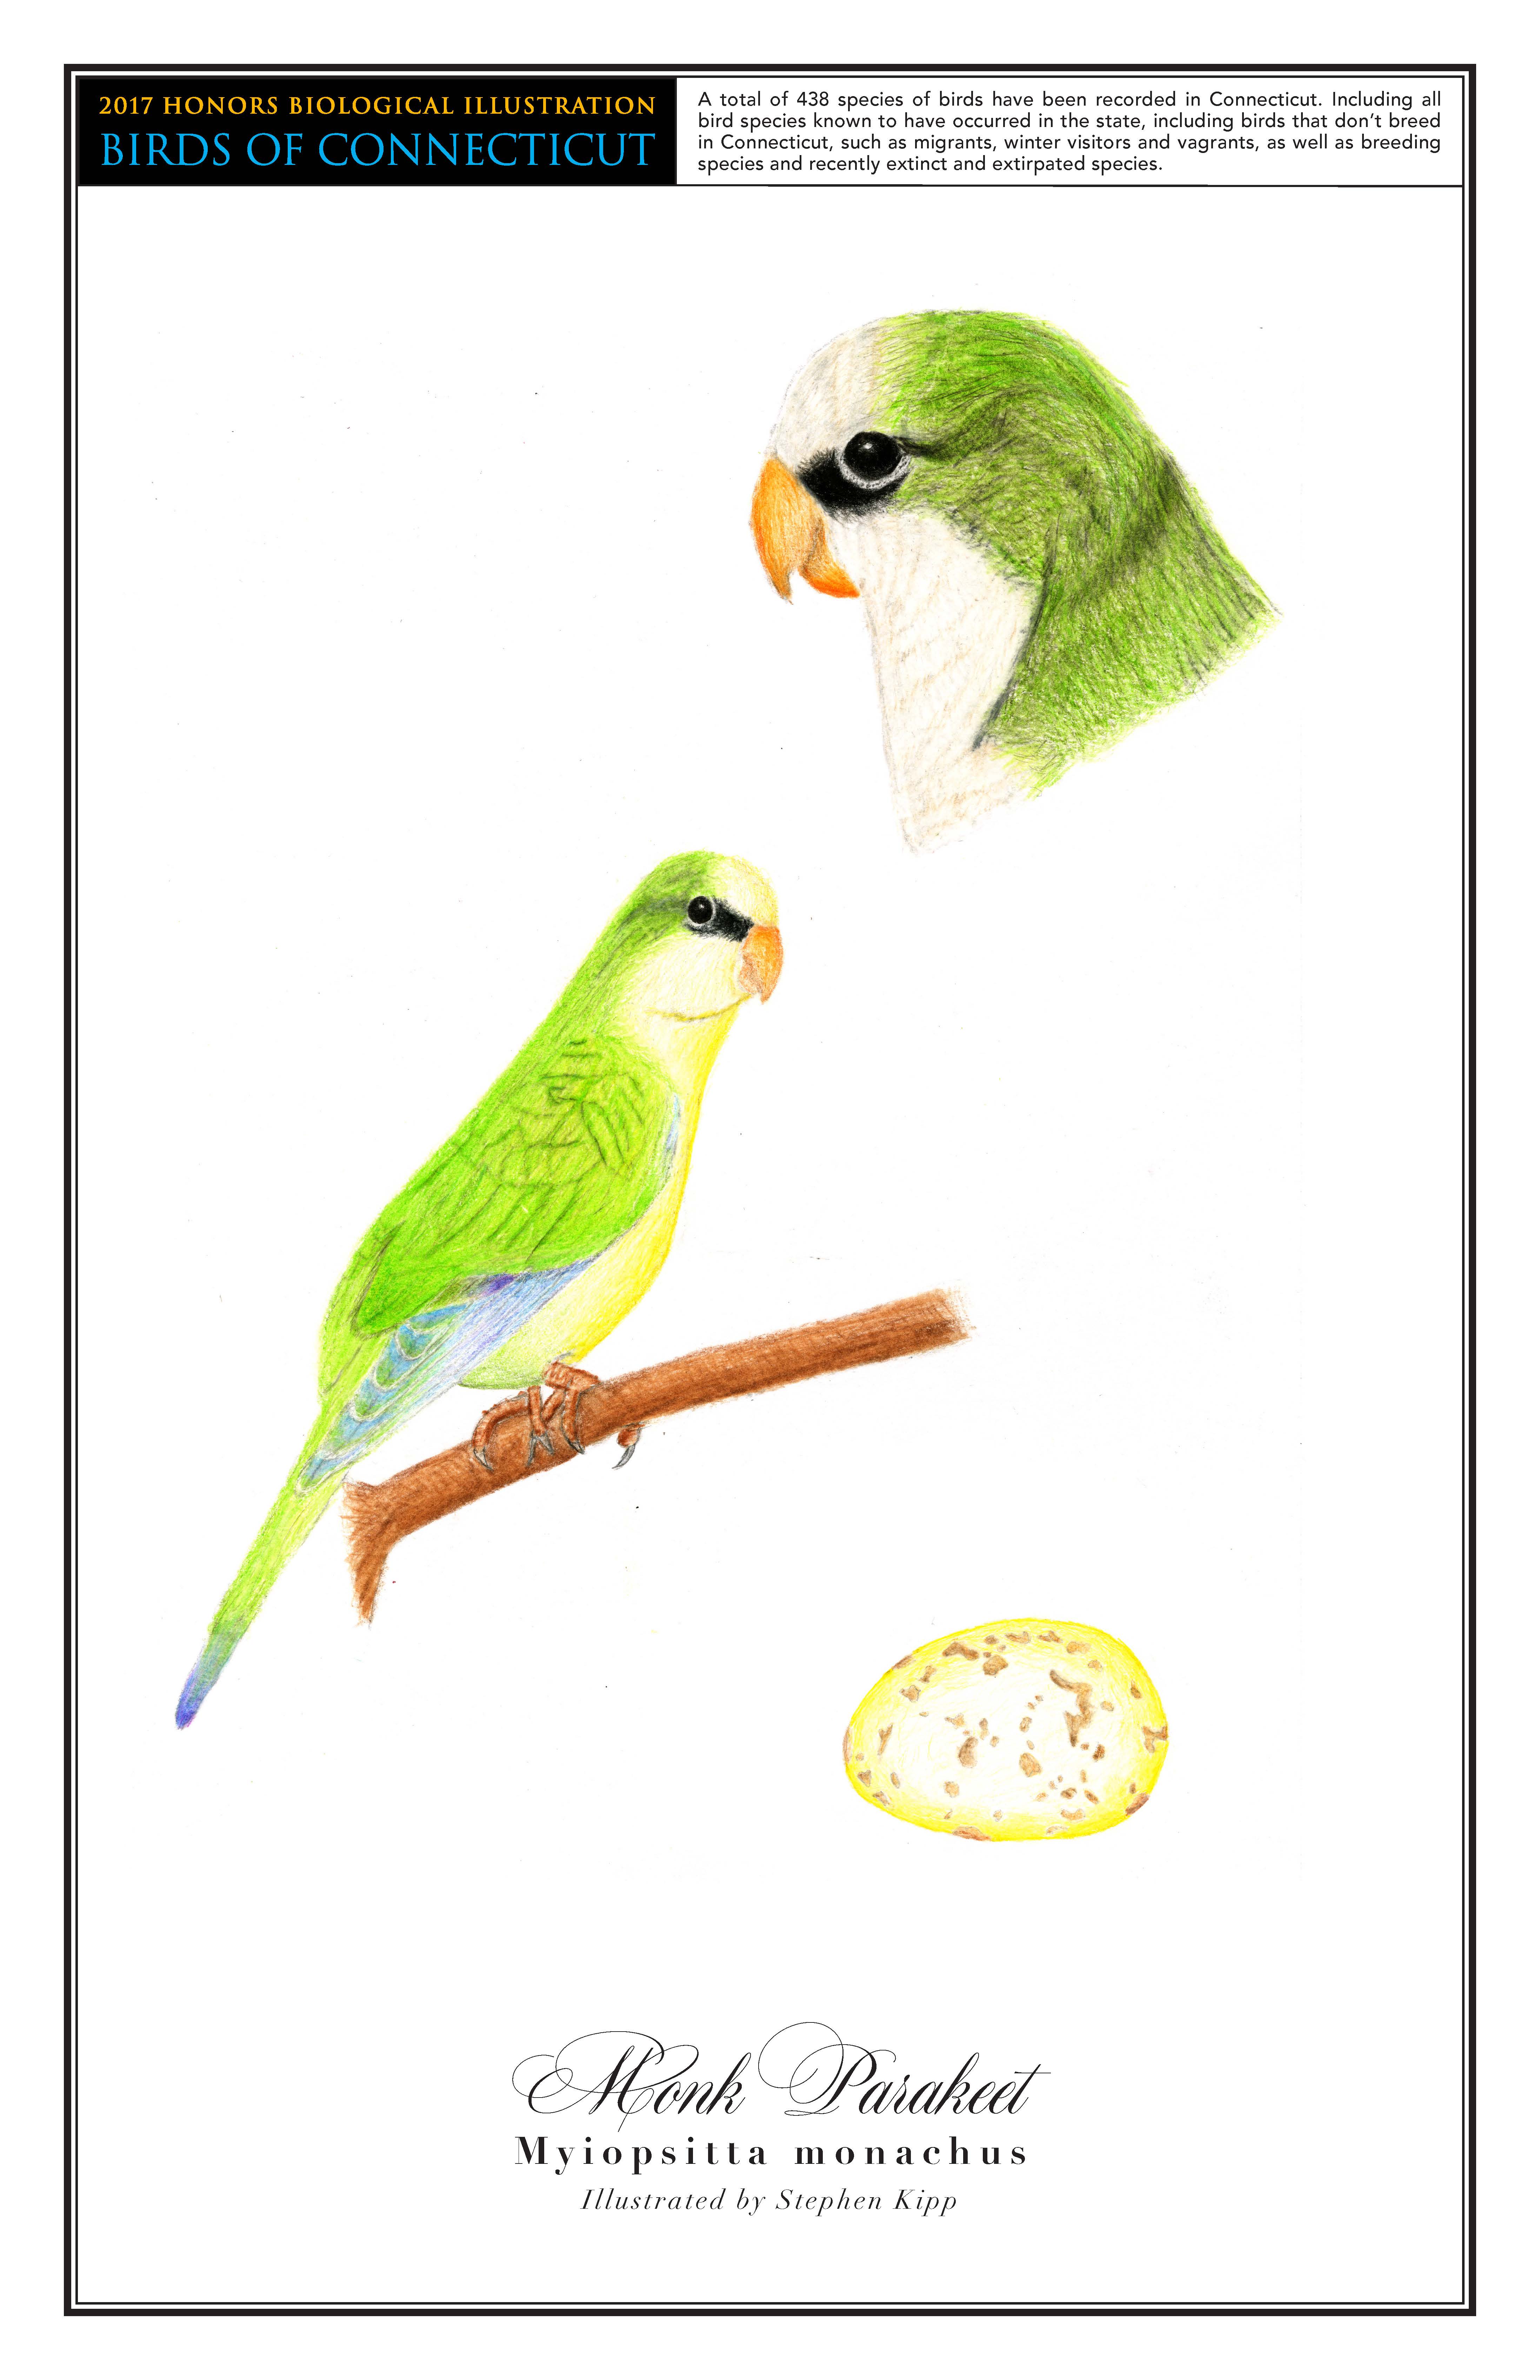 The monk parakeet has a yellow front and a green back with a black stripe across its eye. A drawing of it perched on a branch is on the middle left. In the top right is a close up drawing of its head, and a drawing of its yellow egg speckled brown is in the bottom right.